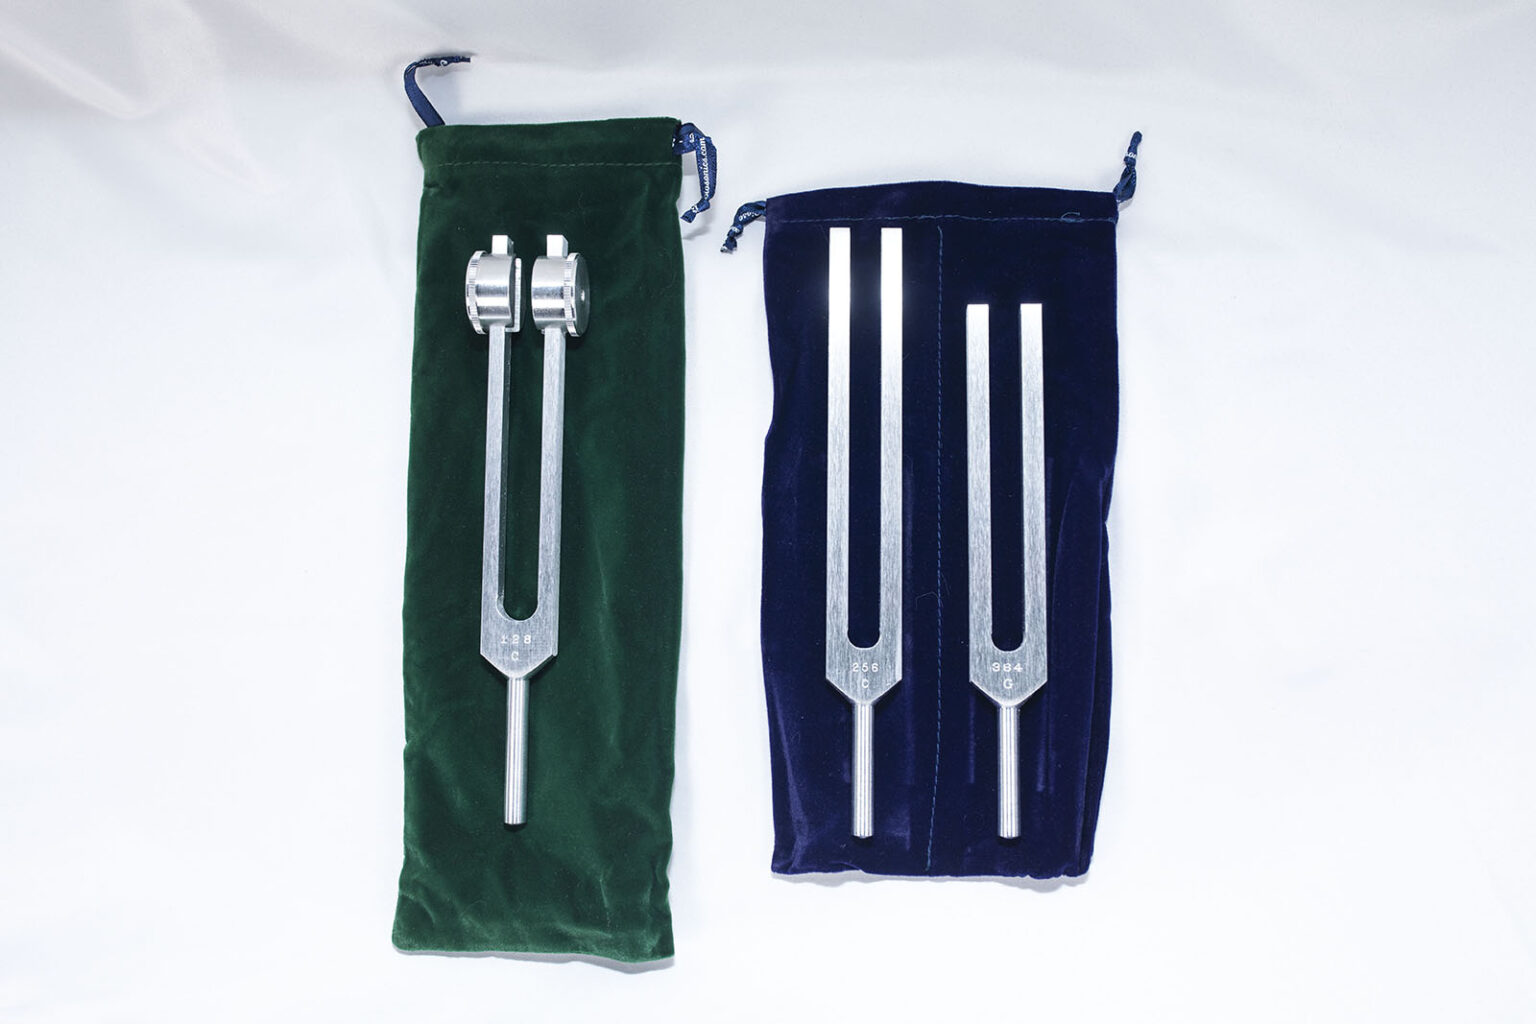 otto 128 tuning fork